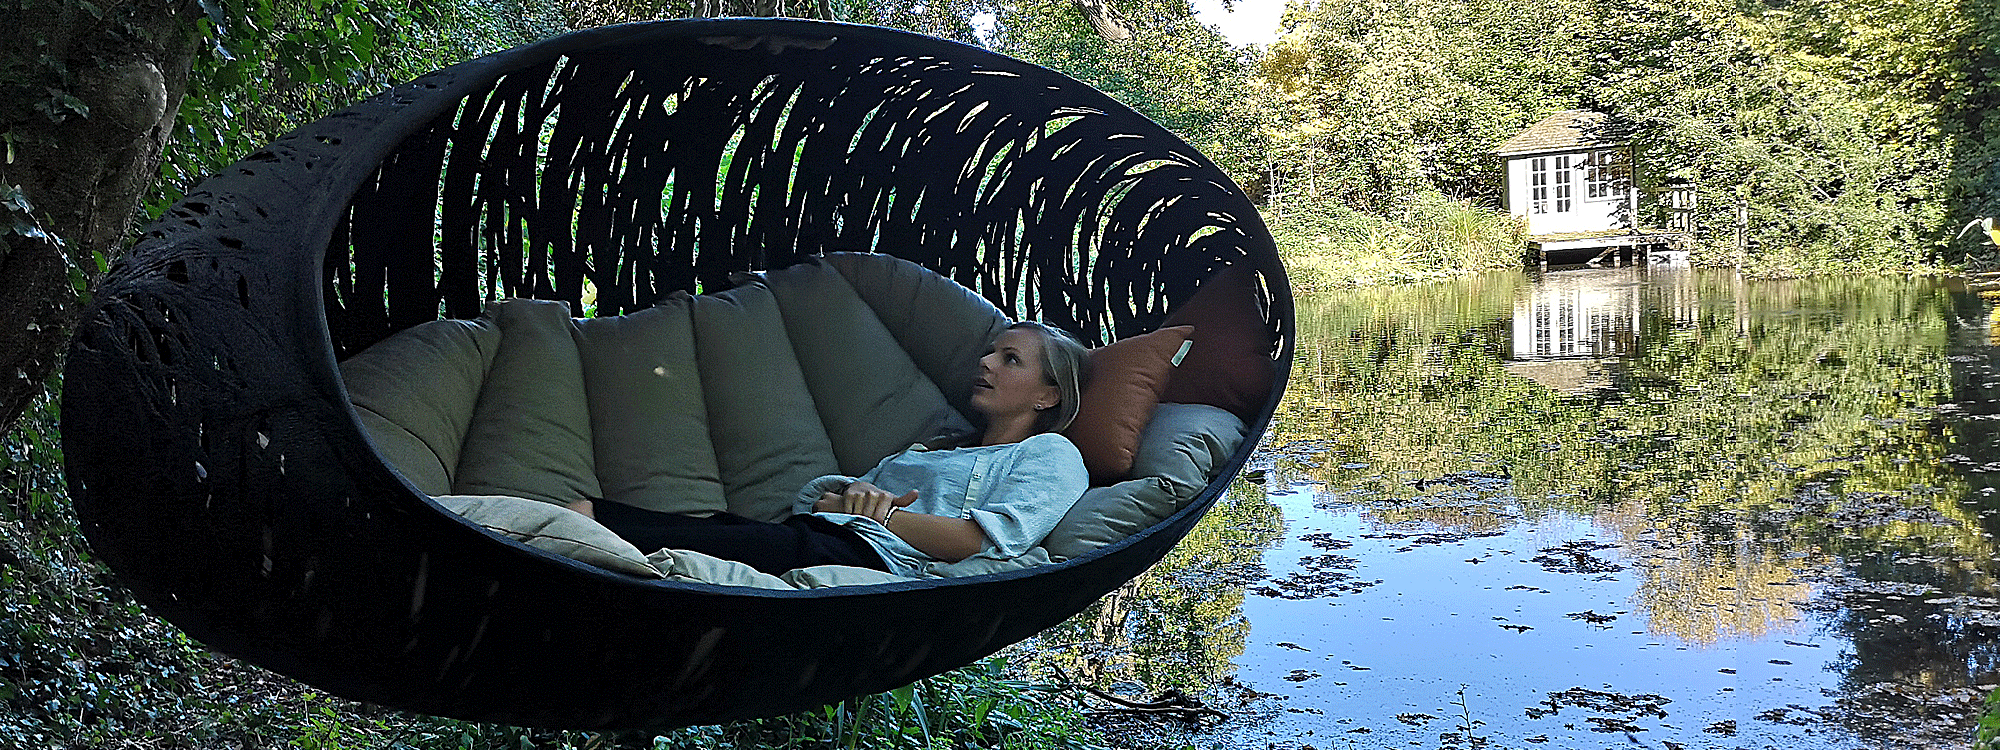 Bios Alpha modern swing seat is a magical hanging garden sofa & luxury sofa swing for 2-3 adults by Unknown high performance furniture.